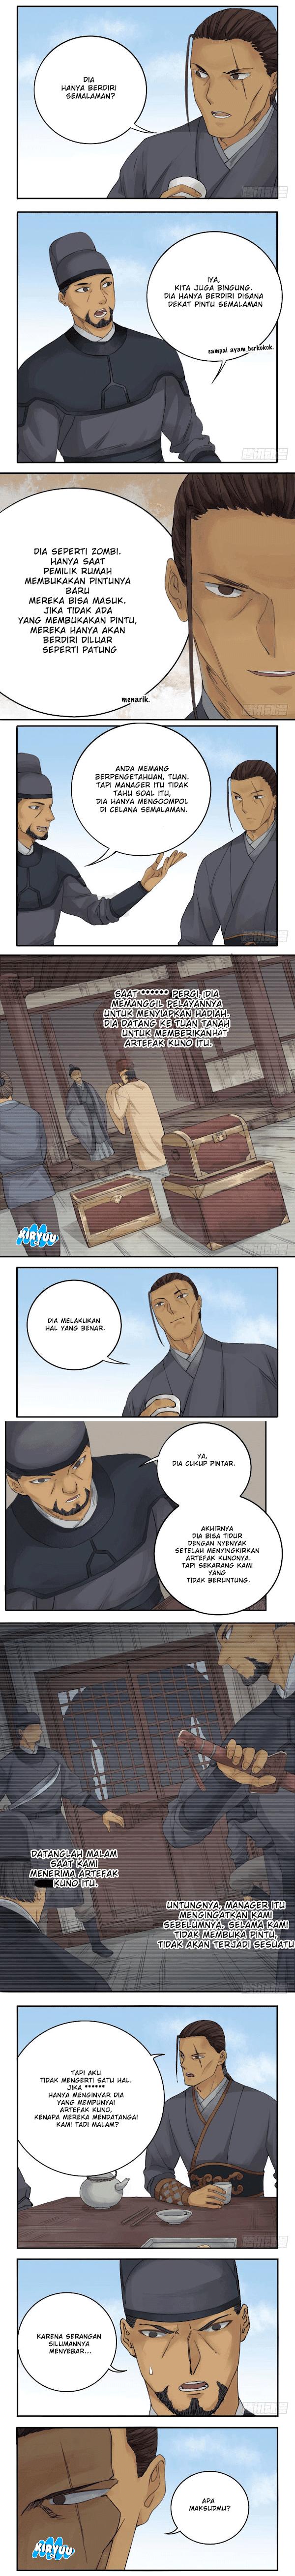 Martial Legacy Chapter 36